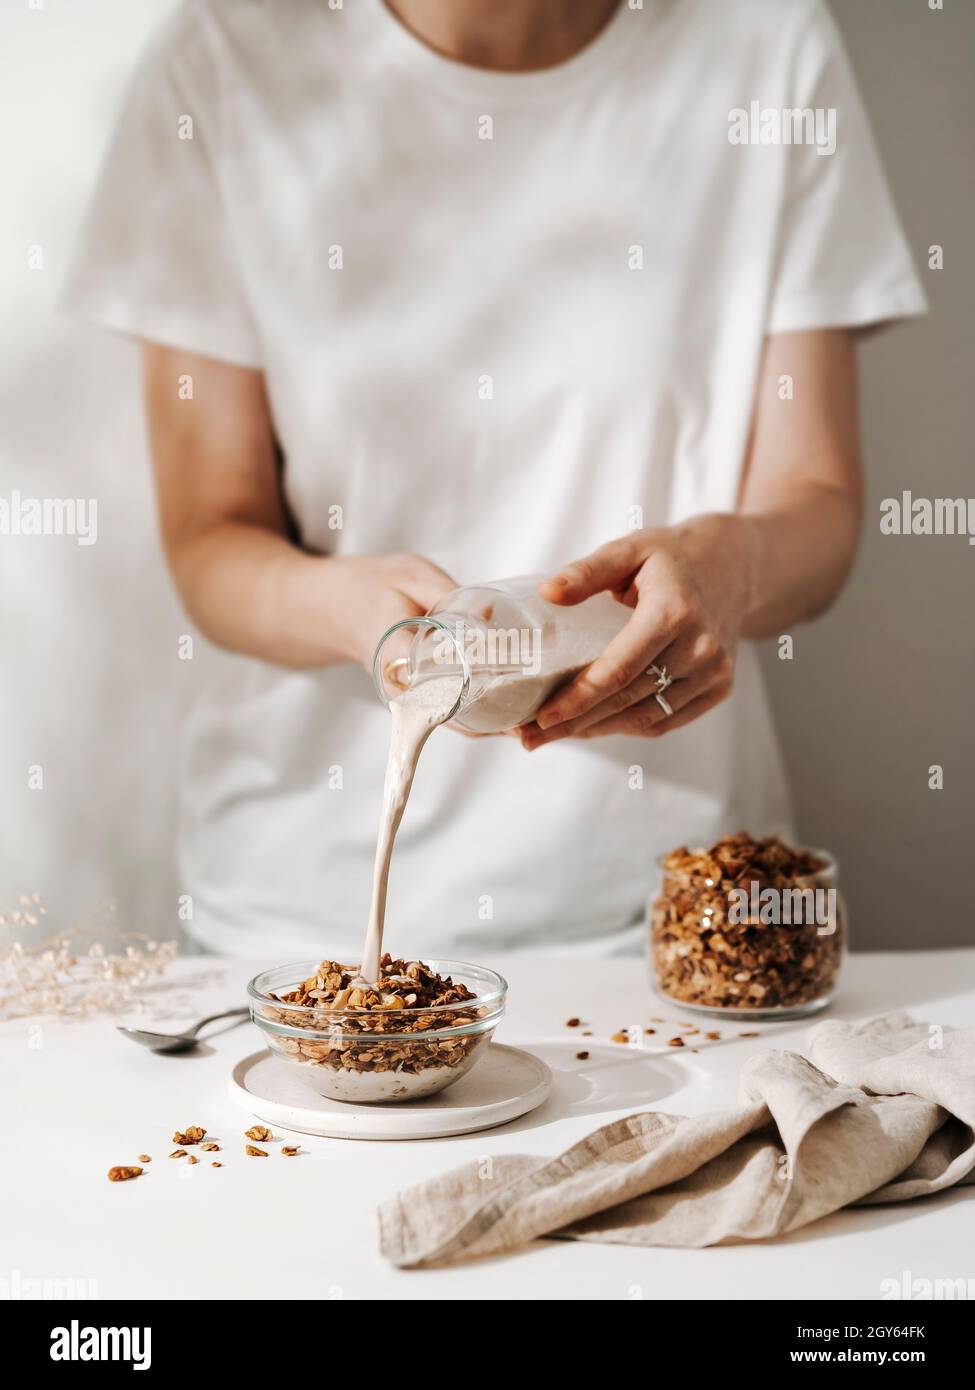 Unrecognizable woman pouring vegan non-dairy milk into glass bowl with gluten-free granola or muesli. Vertical. Modern light minimal pastel color pale Stock Photo